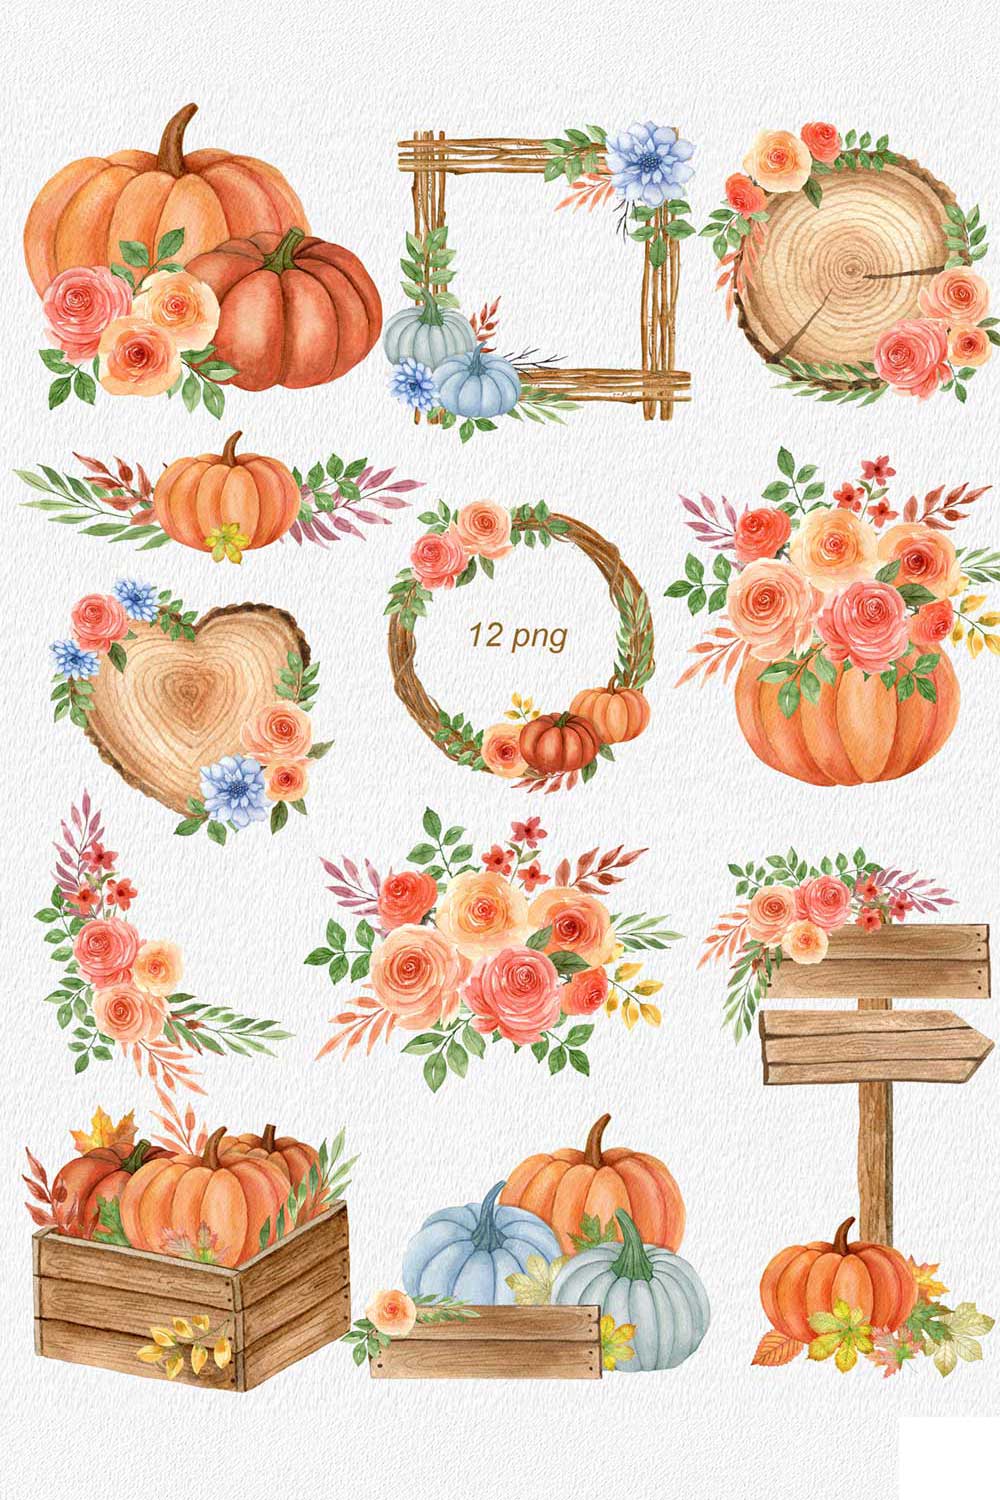 Watercolor Autumn Compositions with Pumpkins and Flowers pinterest image.